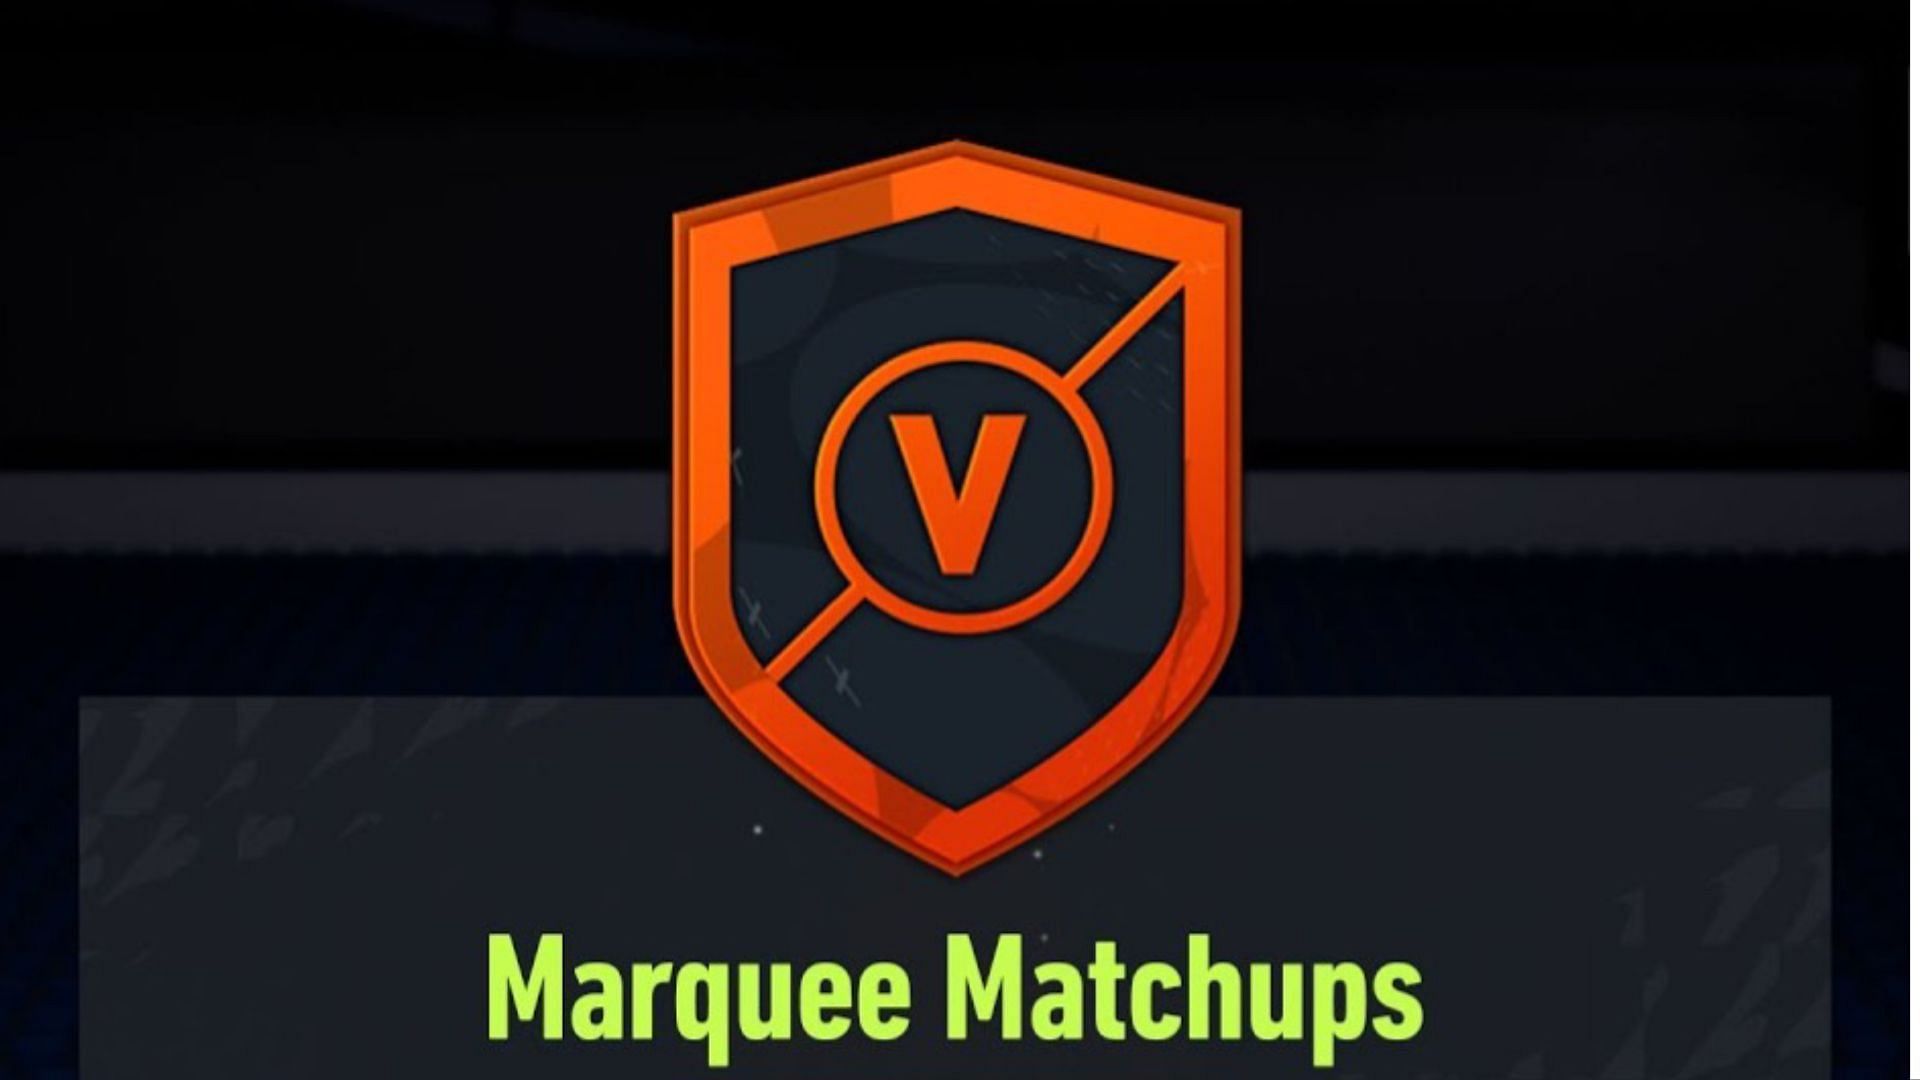 FIFA 23 Marquee Matchups SBC – How to complete, estimated costs, and more (March 16)